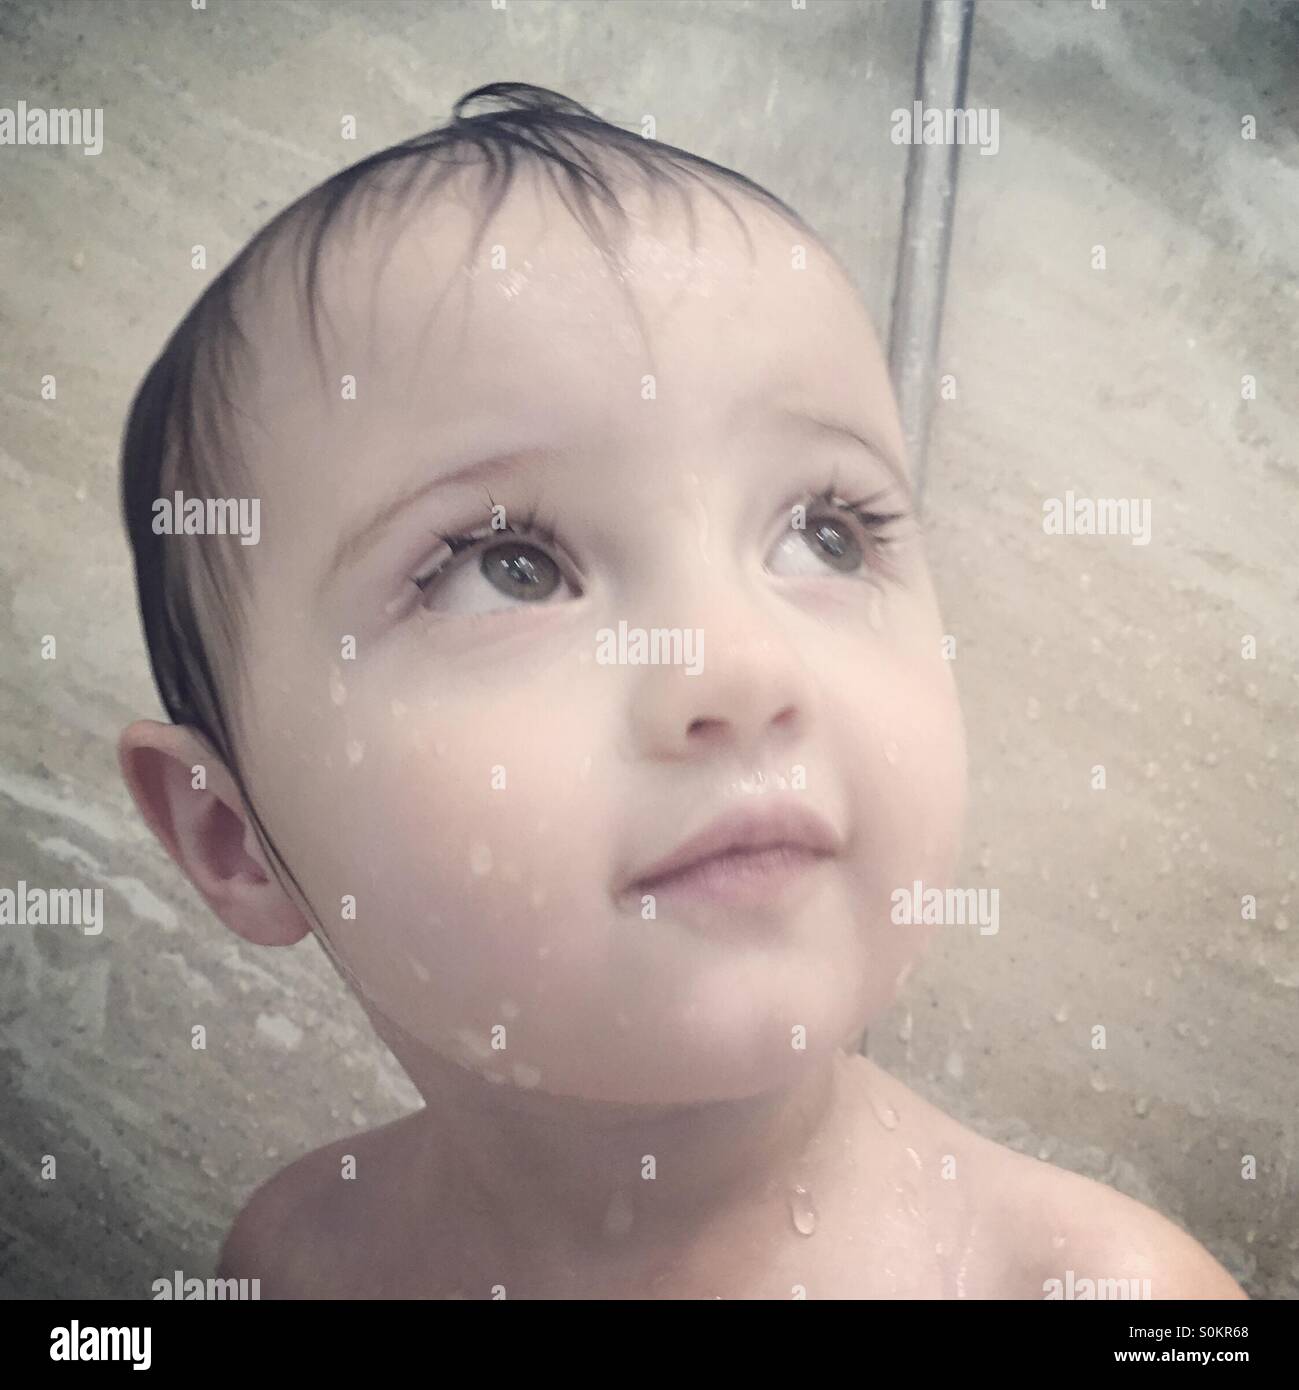 Baby close-up in shower Stock Photo